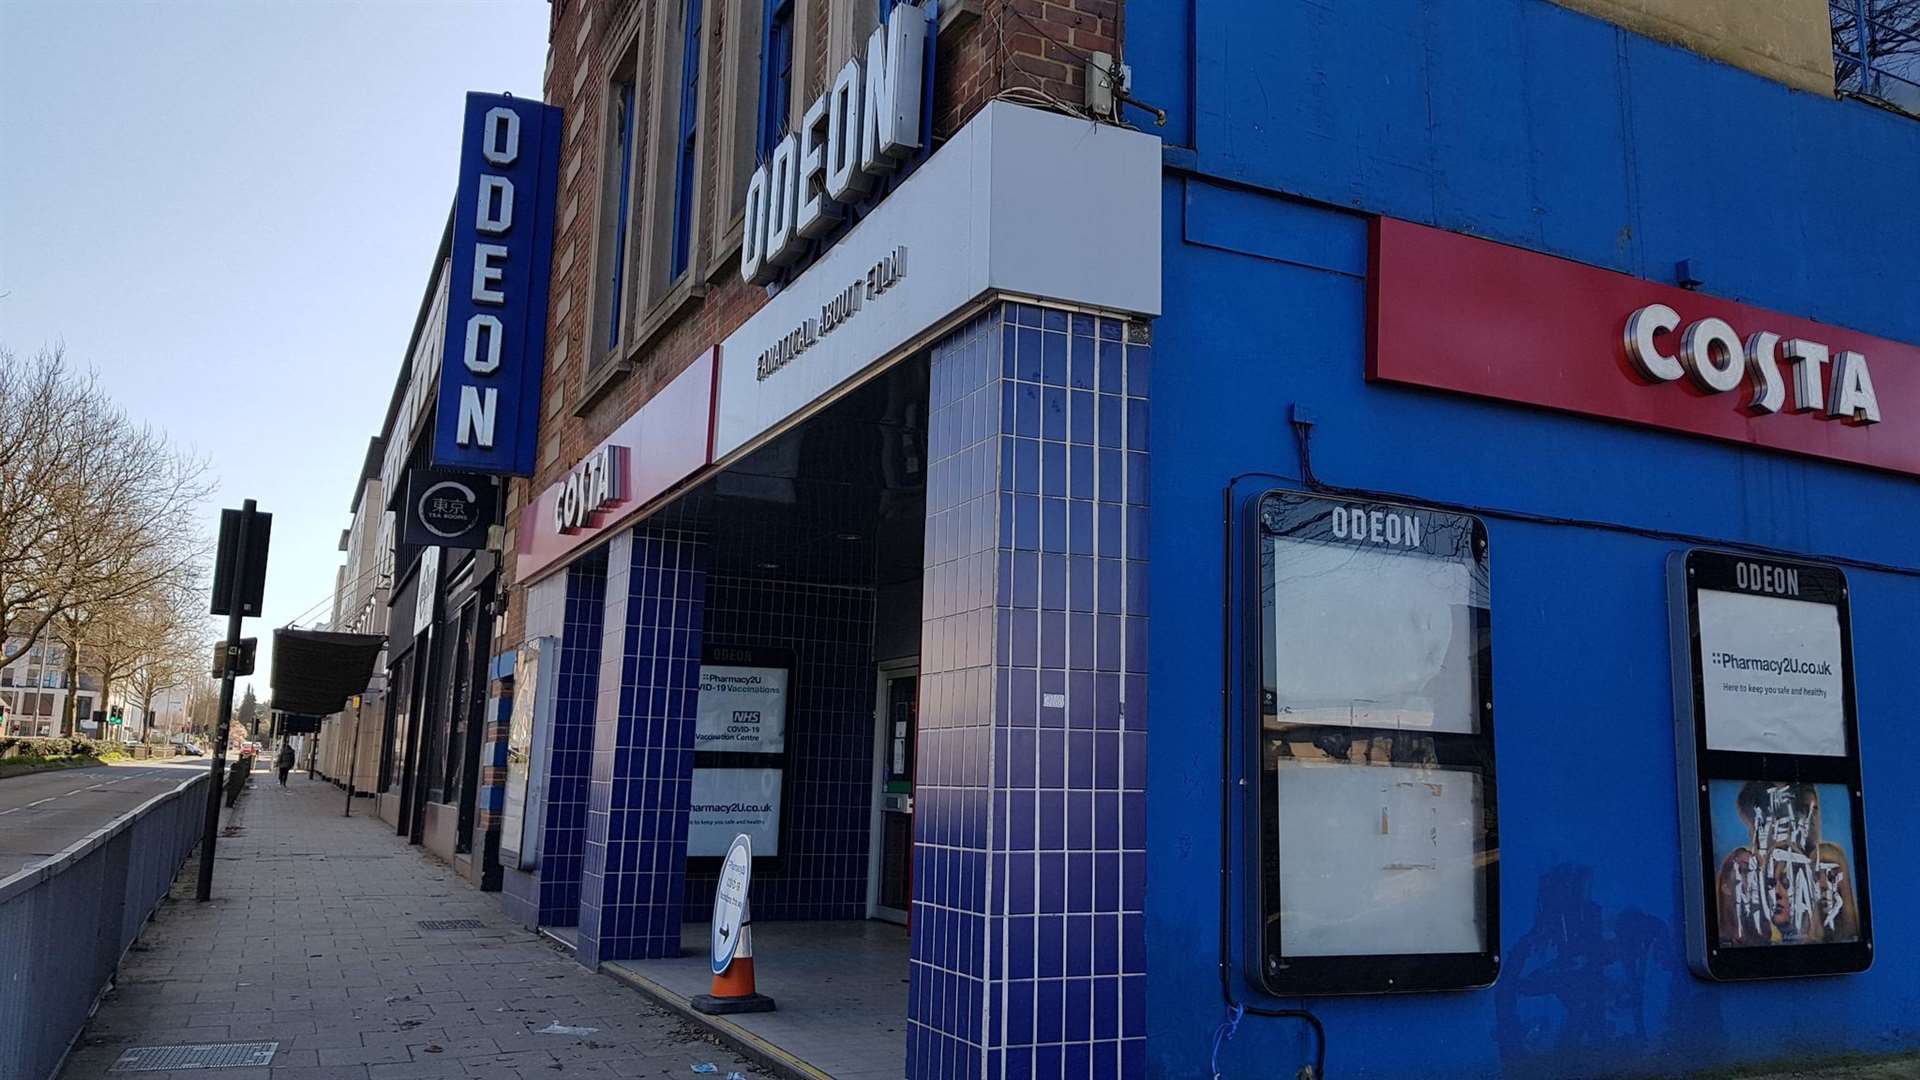 Canterbury's Odeon cinema, which has now shut, is poised to become housing